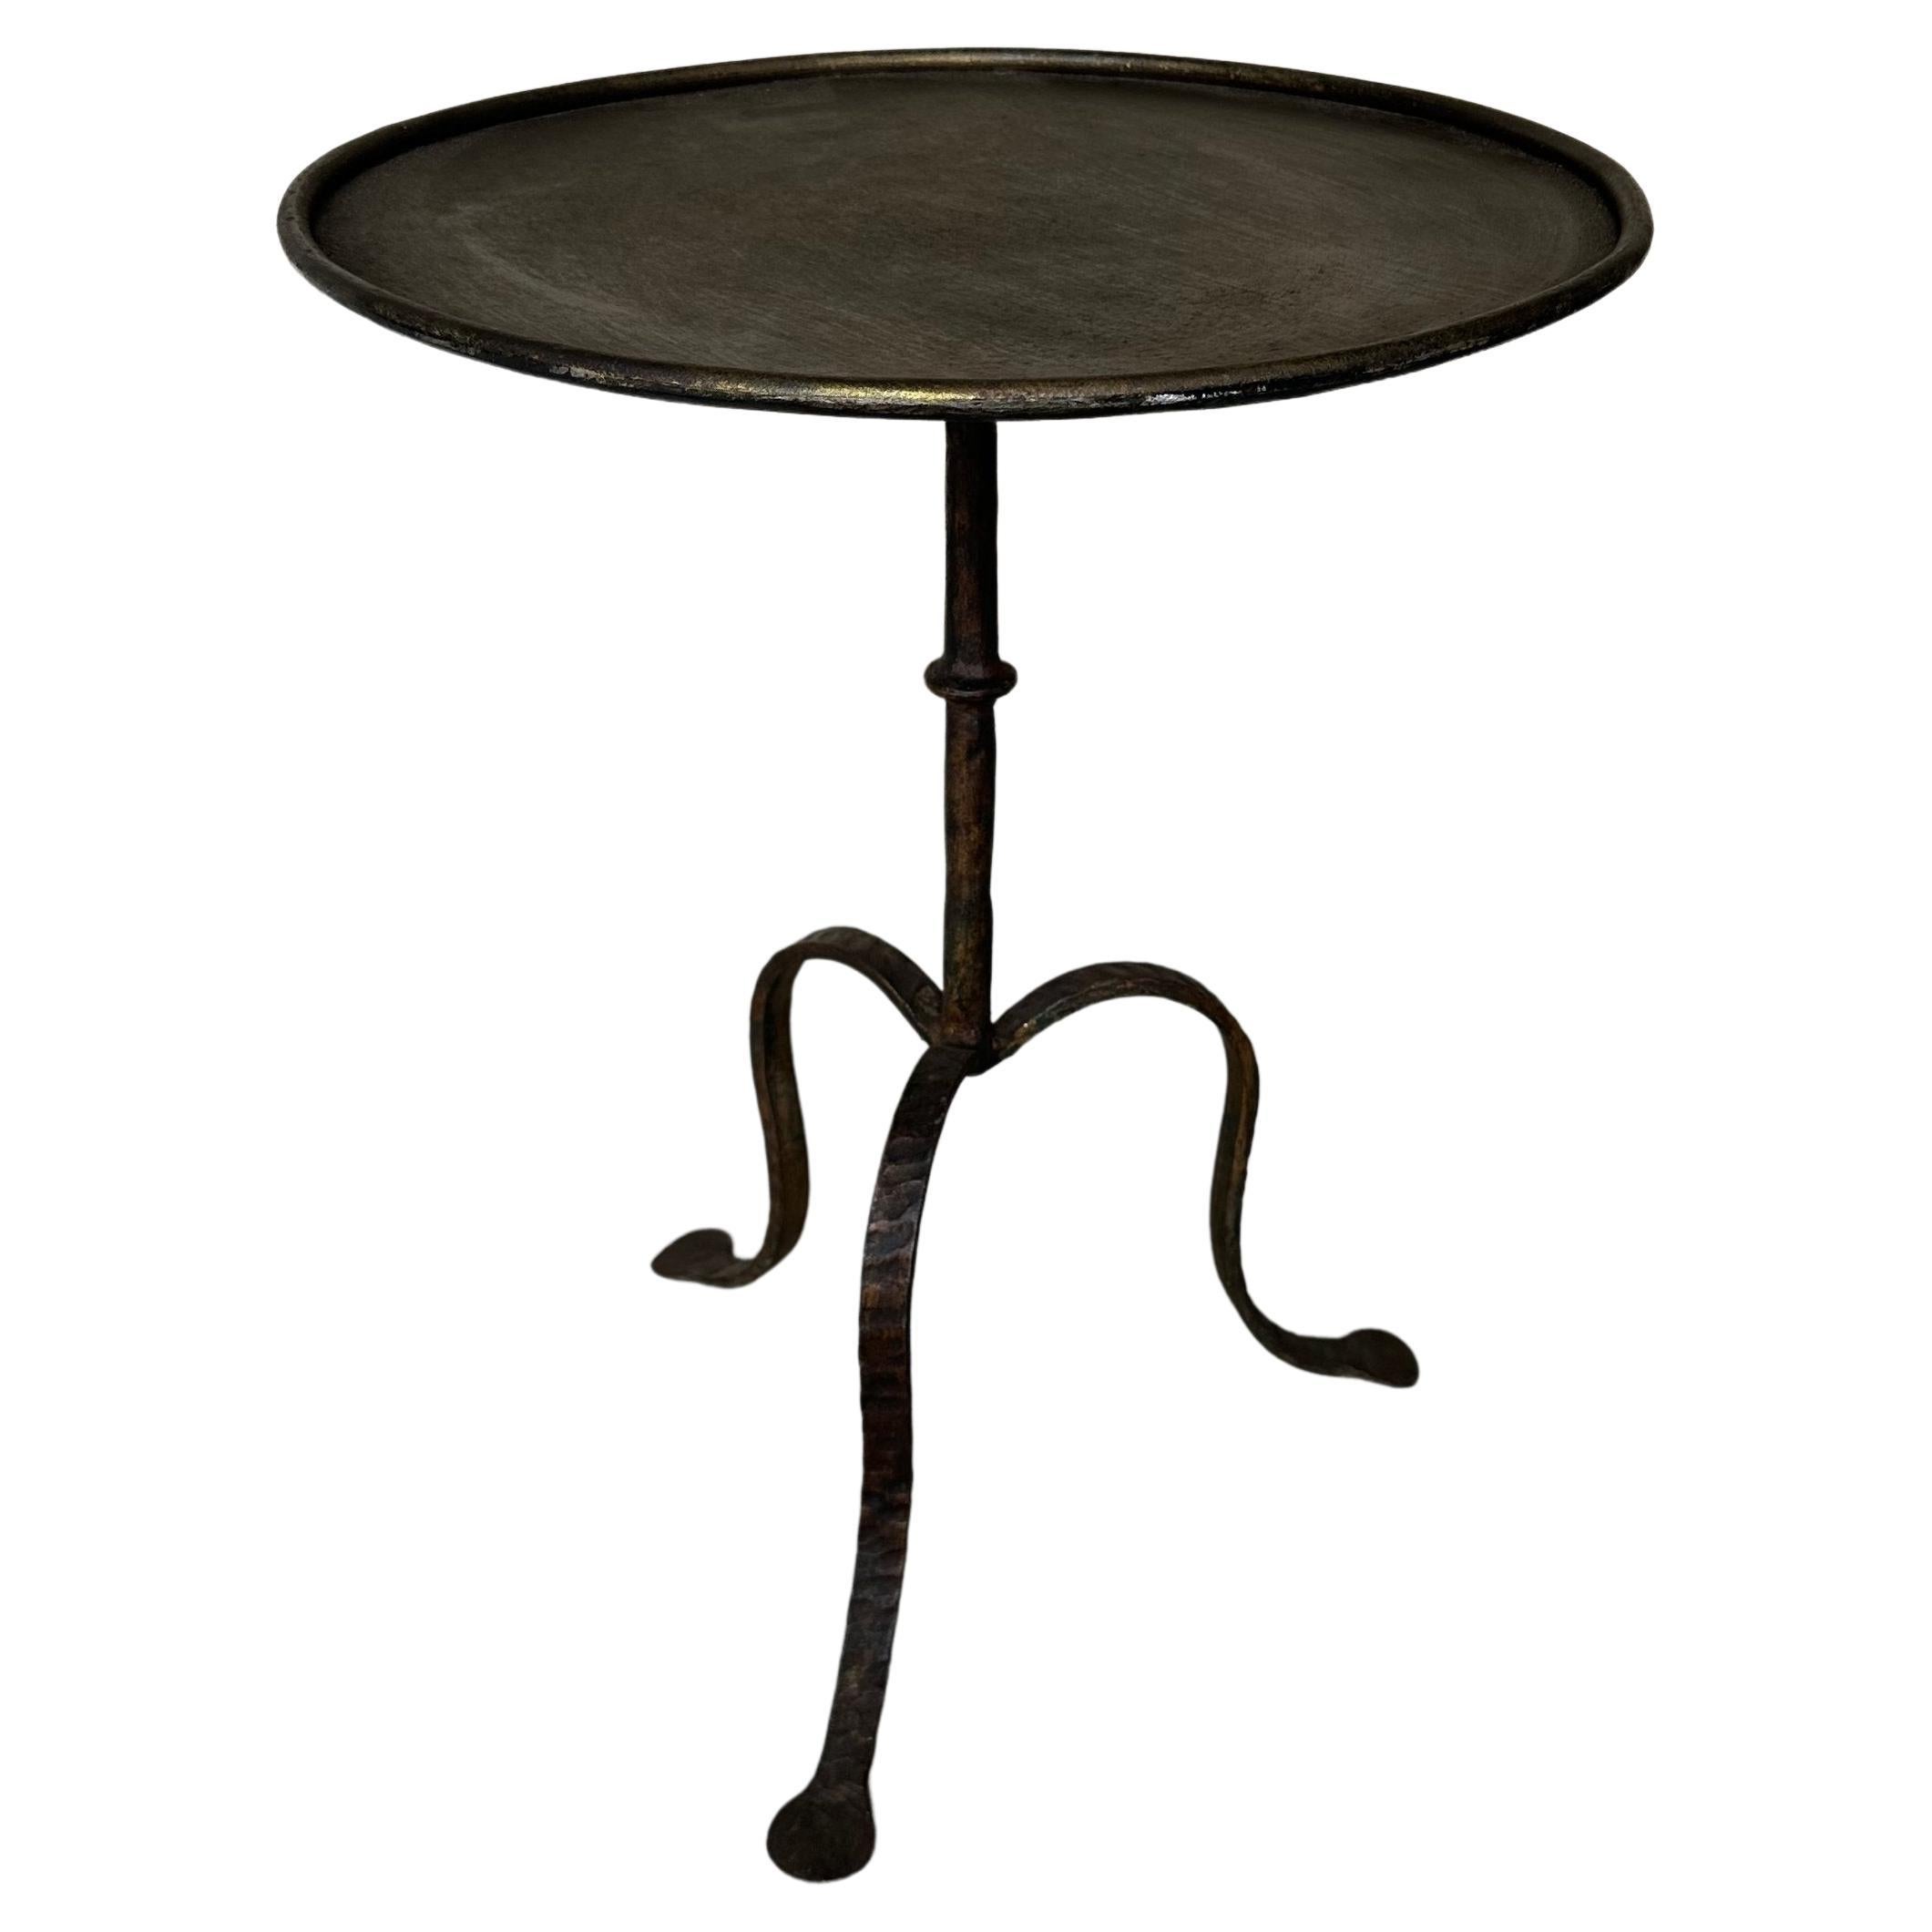 Vintage Spanish Iron Drinks Table with Curved Legs